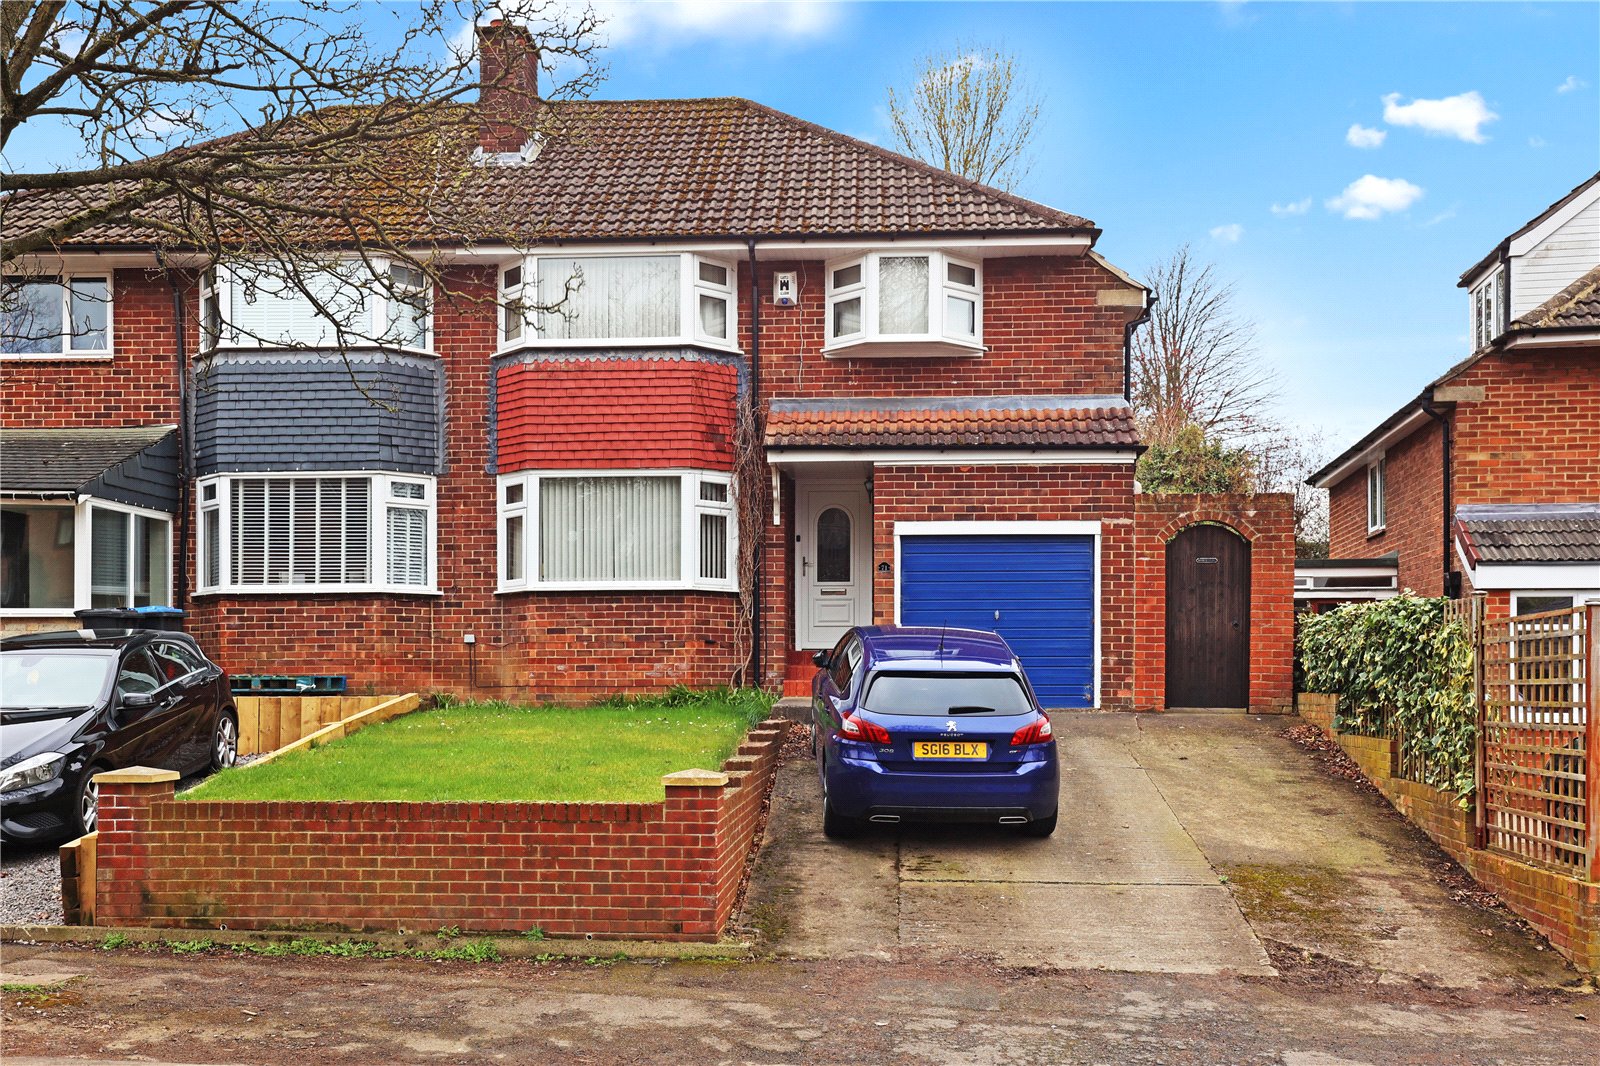 4 bed house for sale - Property Image 1